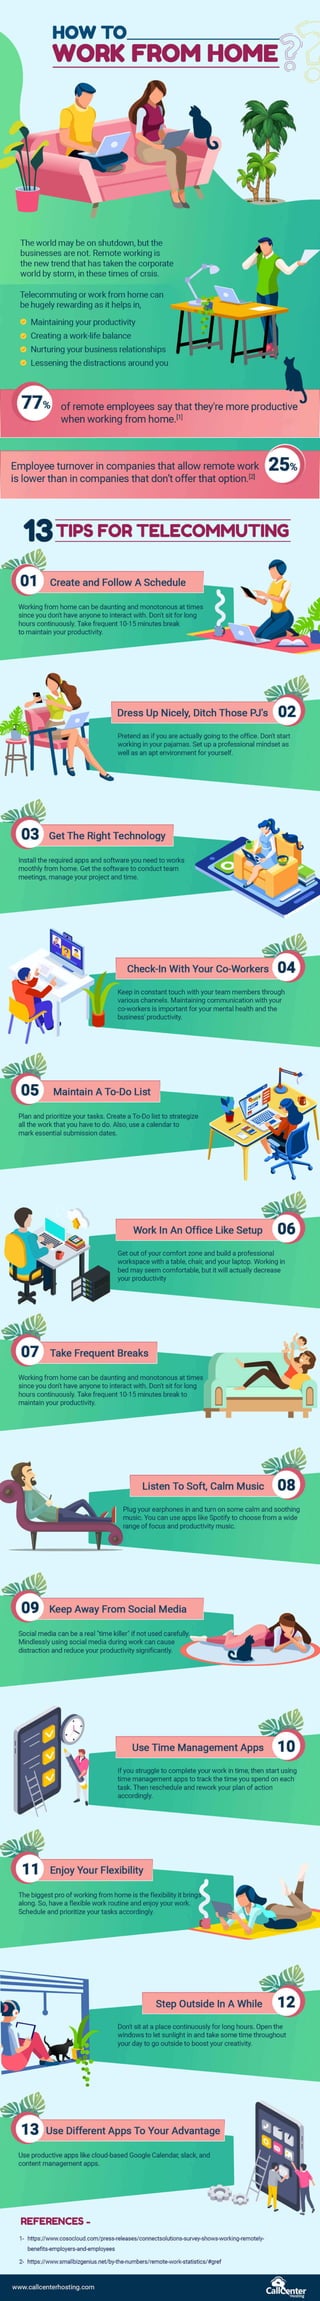 How To Work From Home: 13 Tips For Telecommuting